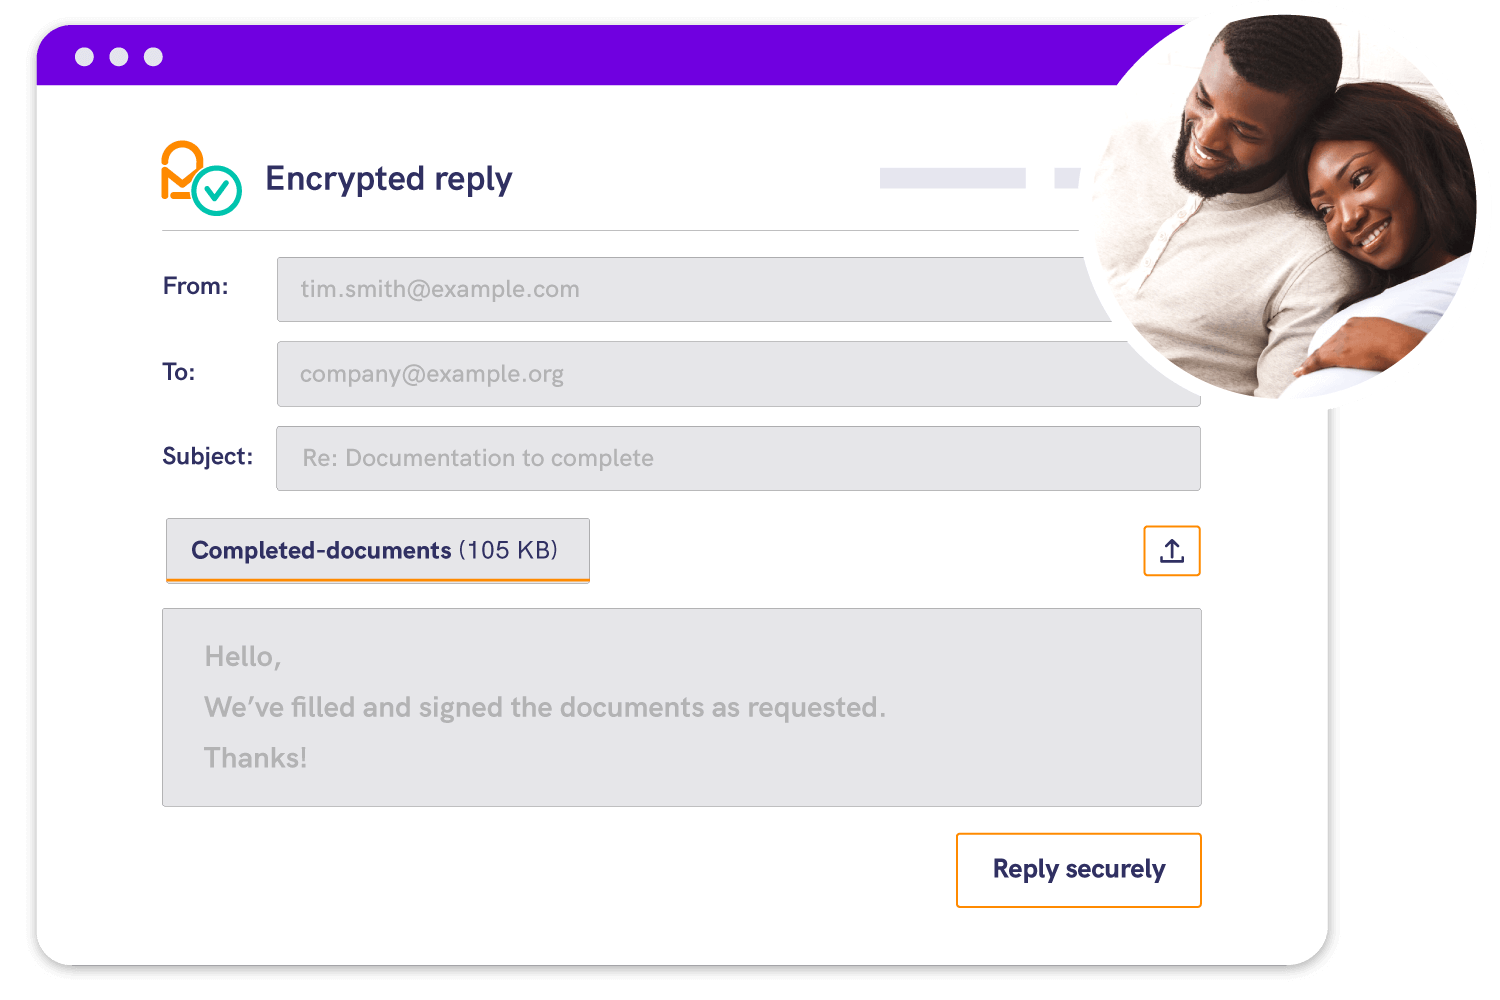 A couple receiving an encrypted email and replying securely